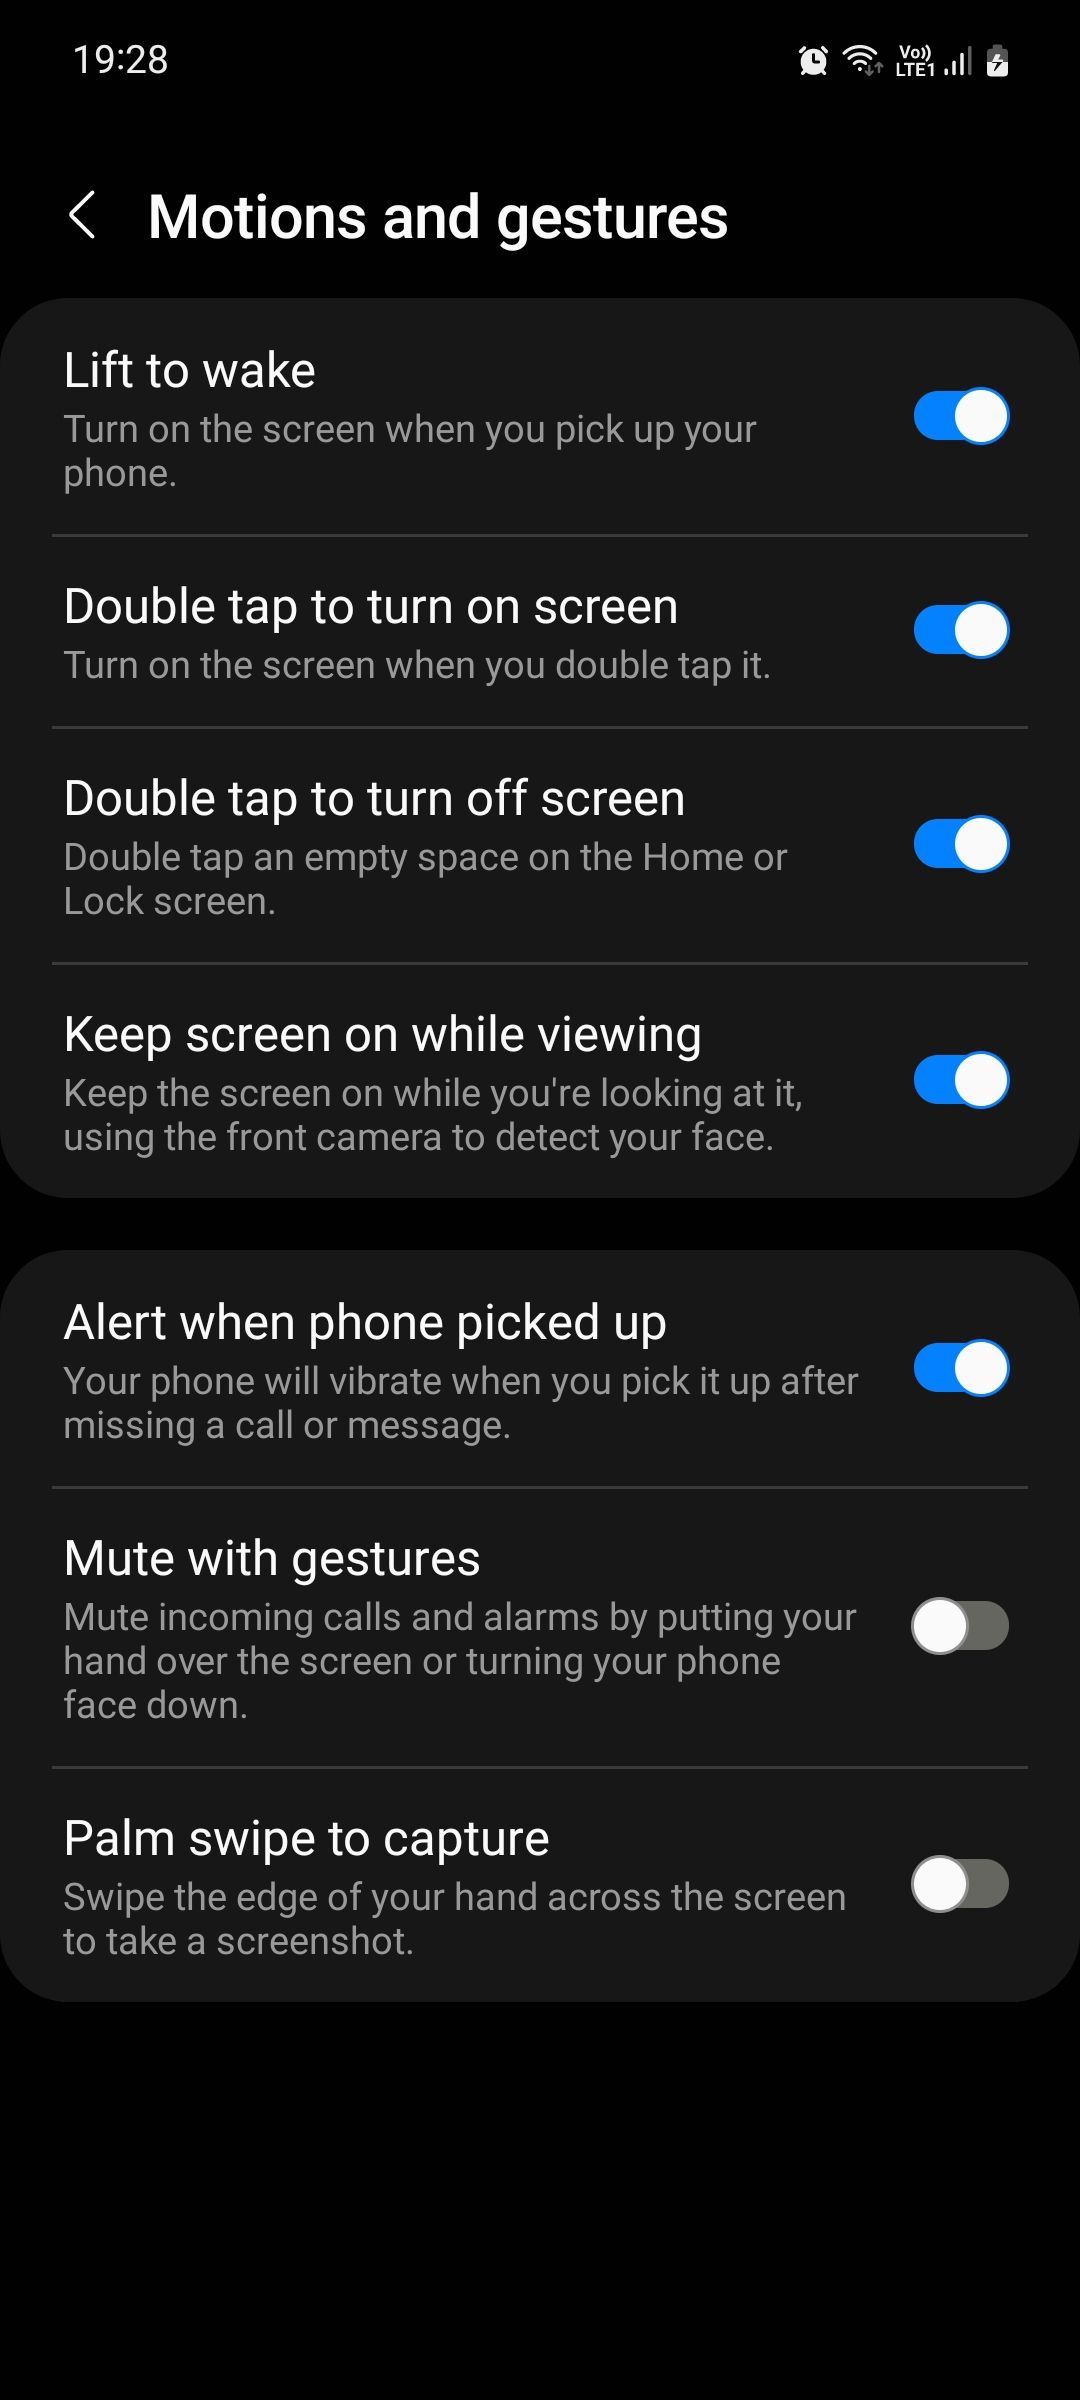 Samsung Galaxy settings motions and gestures